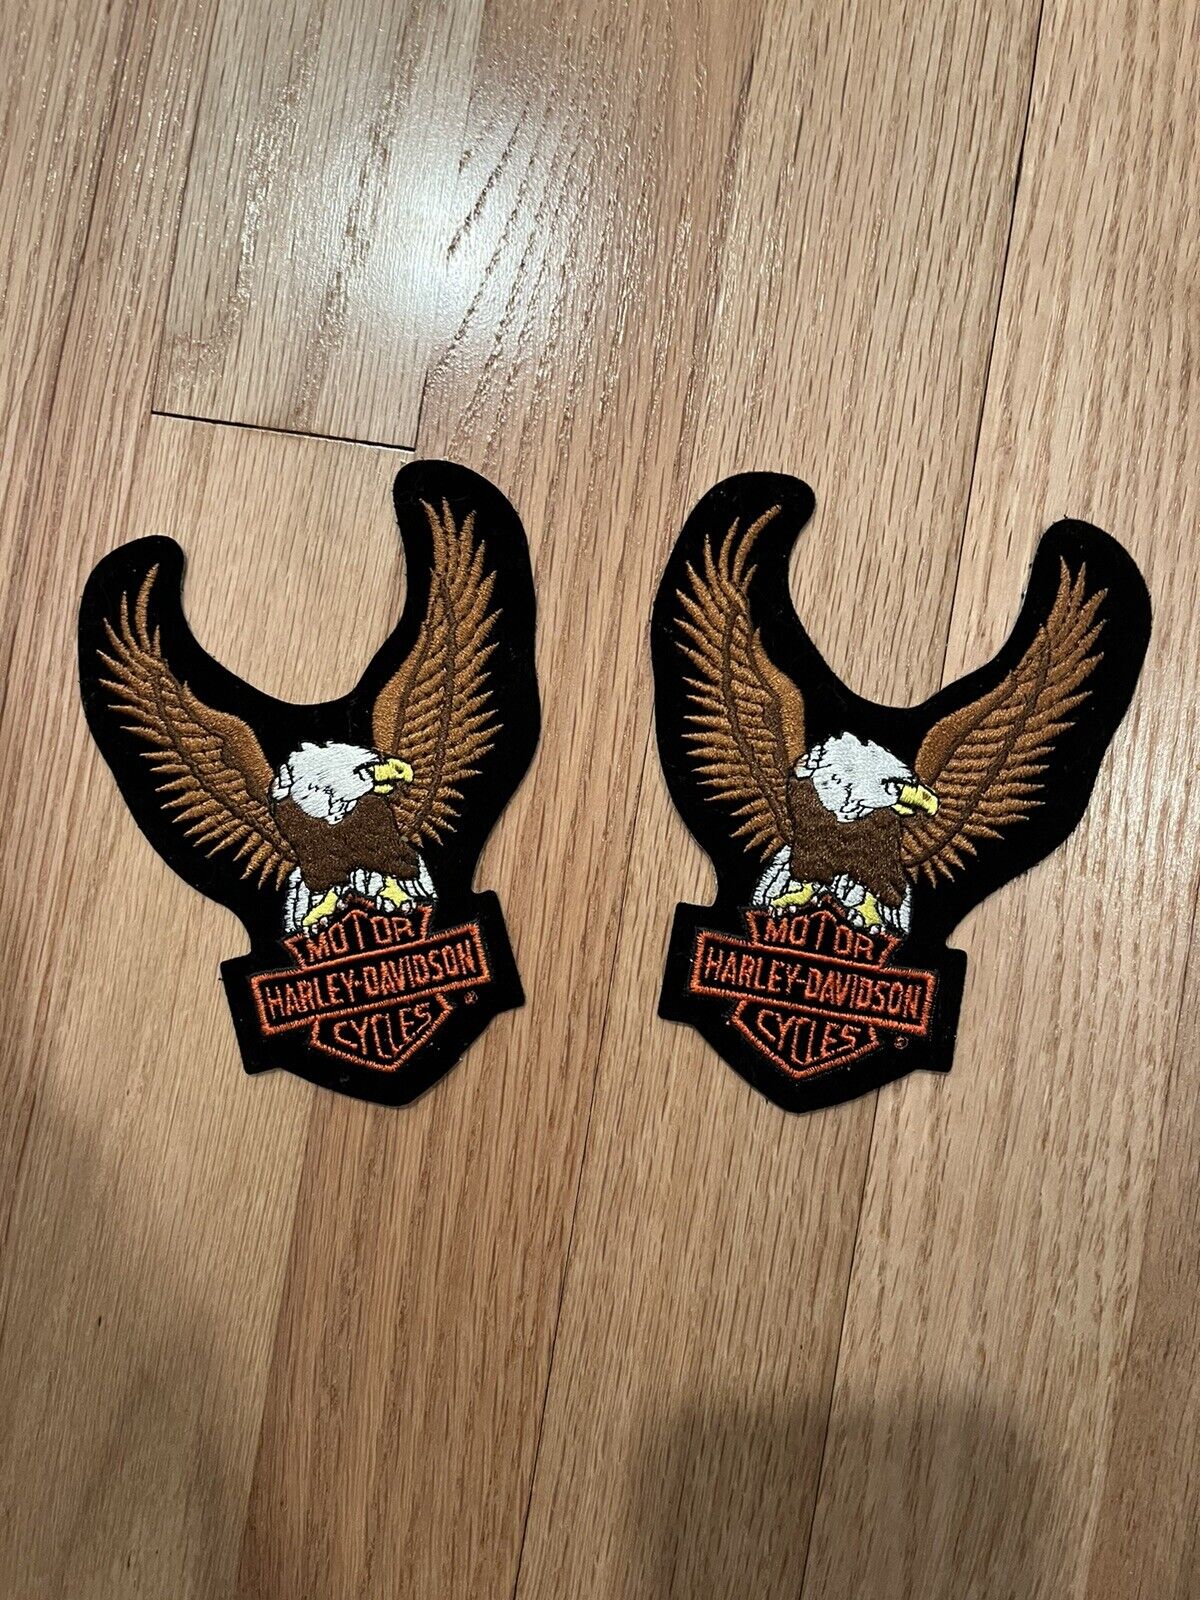 Harley Davidson Patches